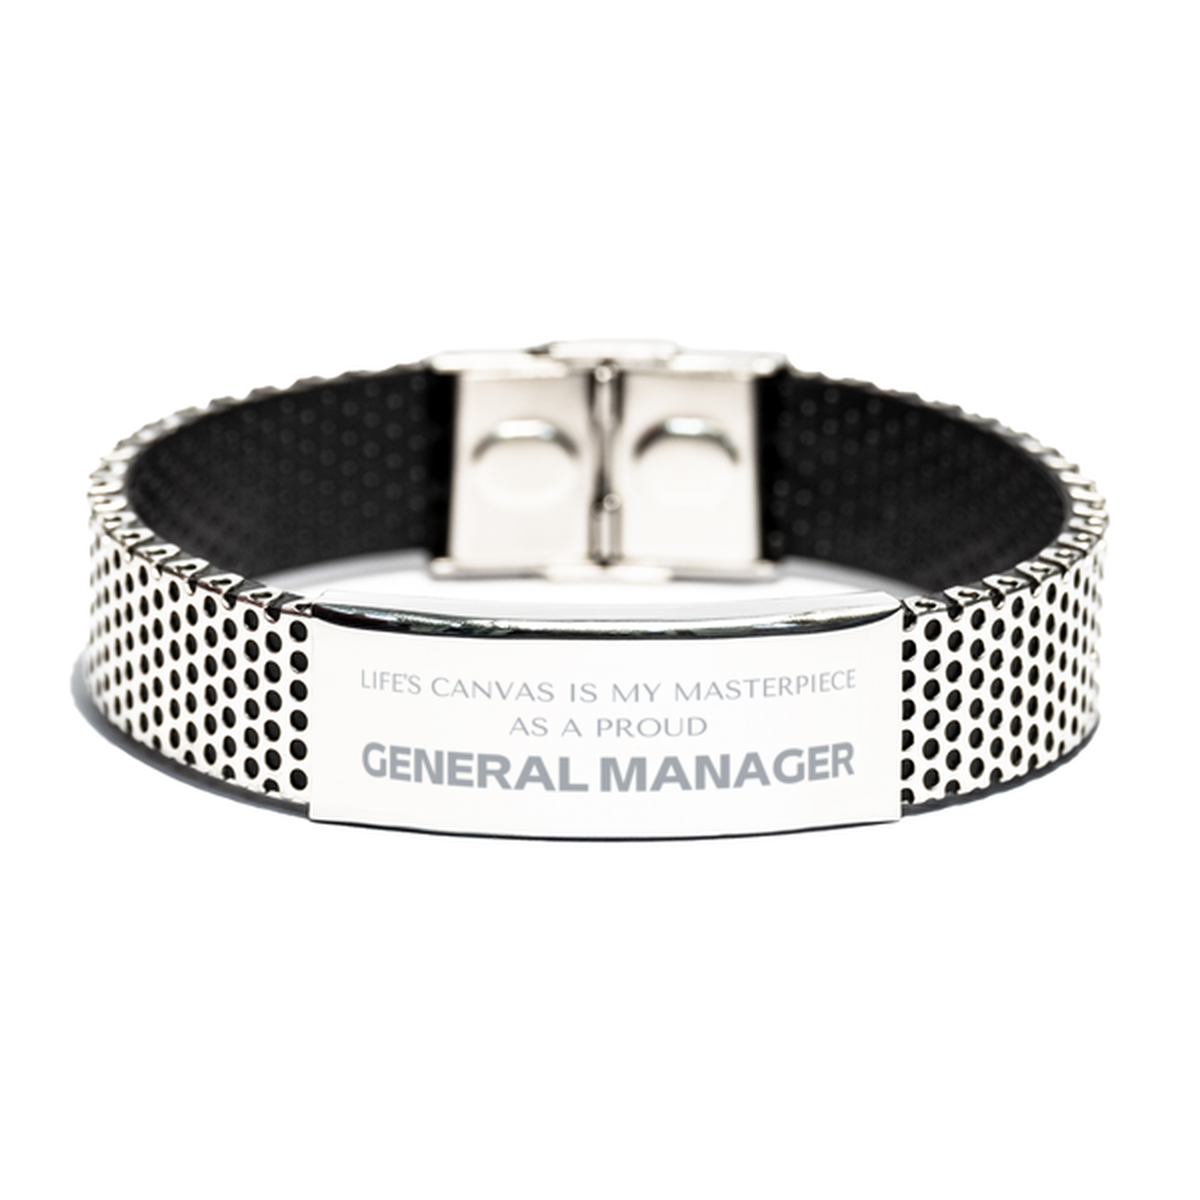 Proud General Manager Gifts, Life's canvas is my masterpiece, Epic Birthday Christmas Unique Stainless Steel Bracelet For General Manager, Coworkers, Men, Women, Friends